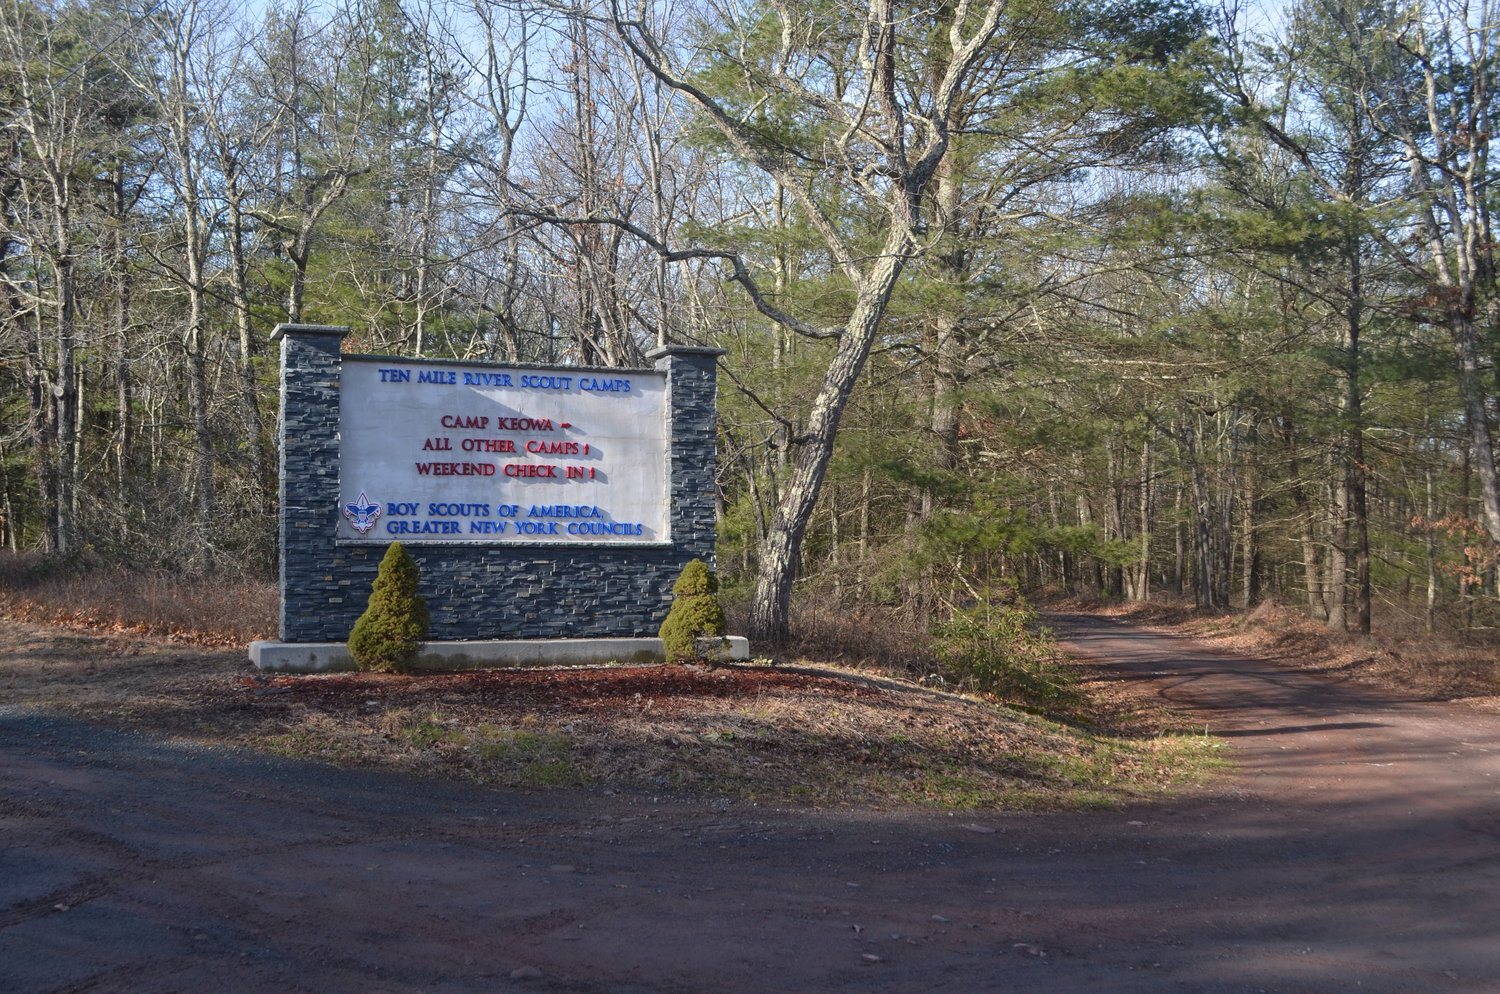 The Greater New York Council of the Boy Scouts of America is currently in talks to sell thousands of acres of land from the Ten Mile River scout camps.